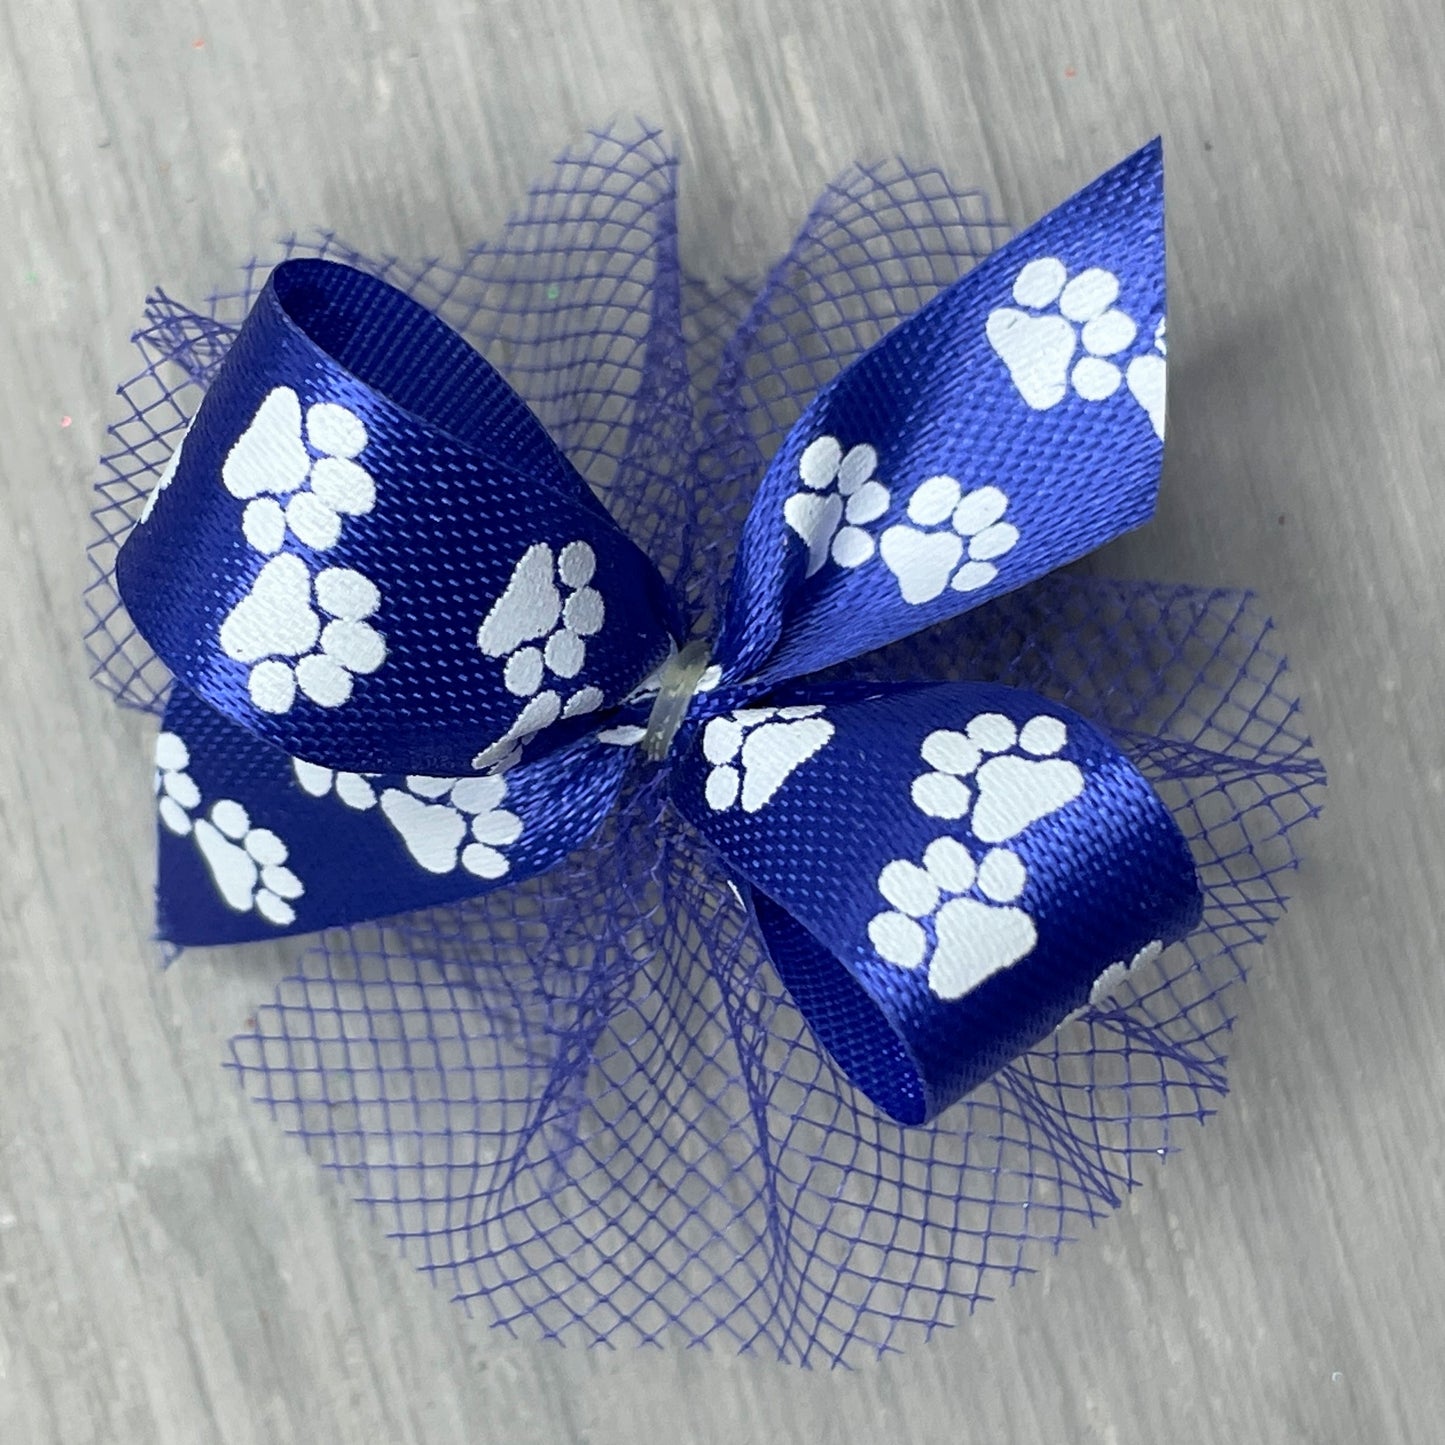 Paw Print Collection - Great For Everyday - 50 Medium Bows